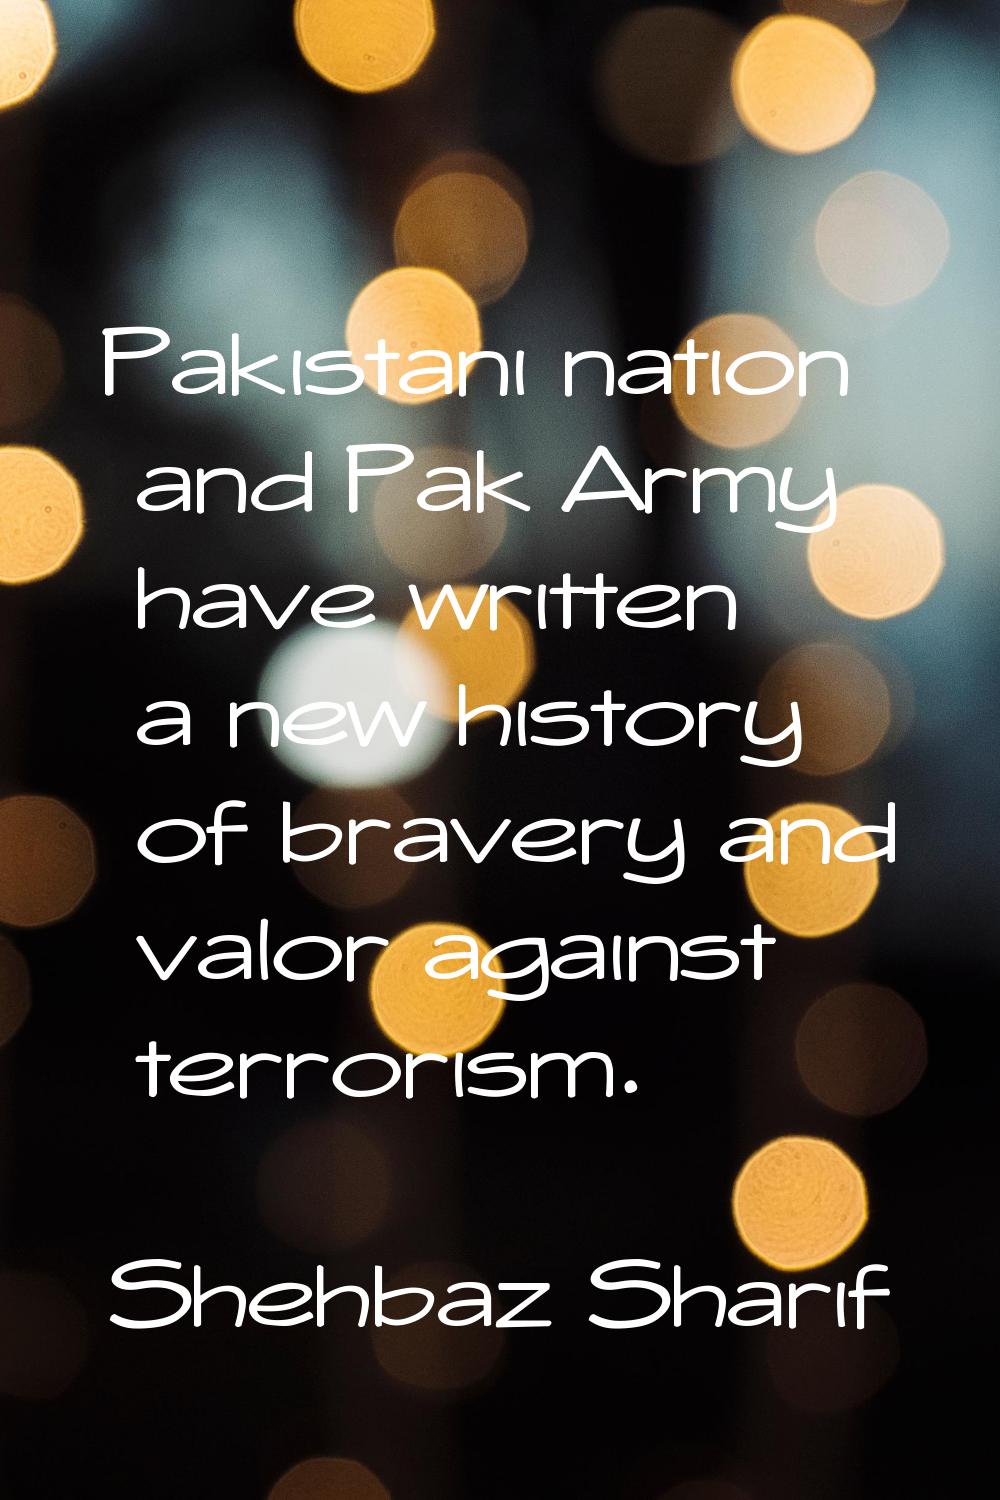 Pakistani nation and Pak Army have written a new history of bravery and valor against terrorism.